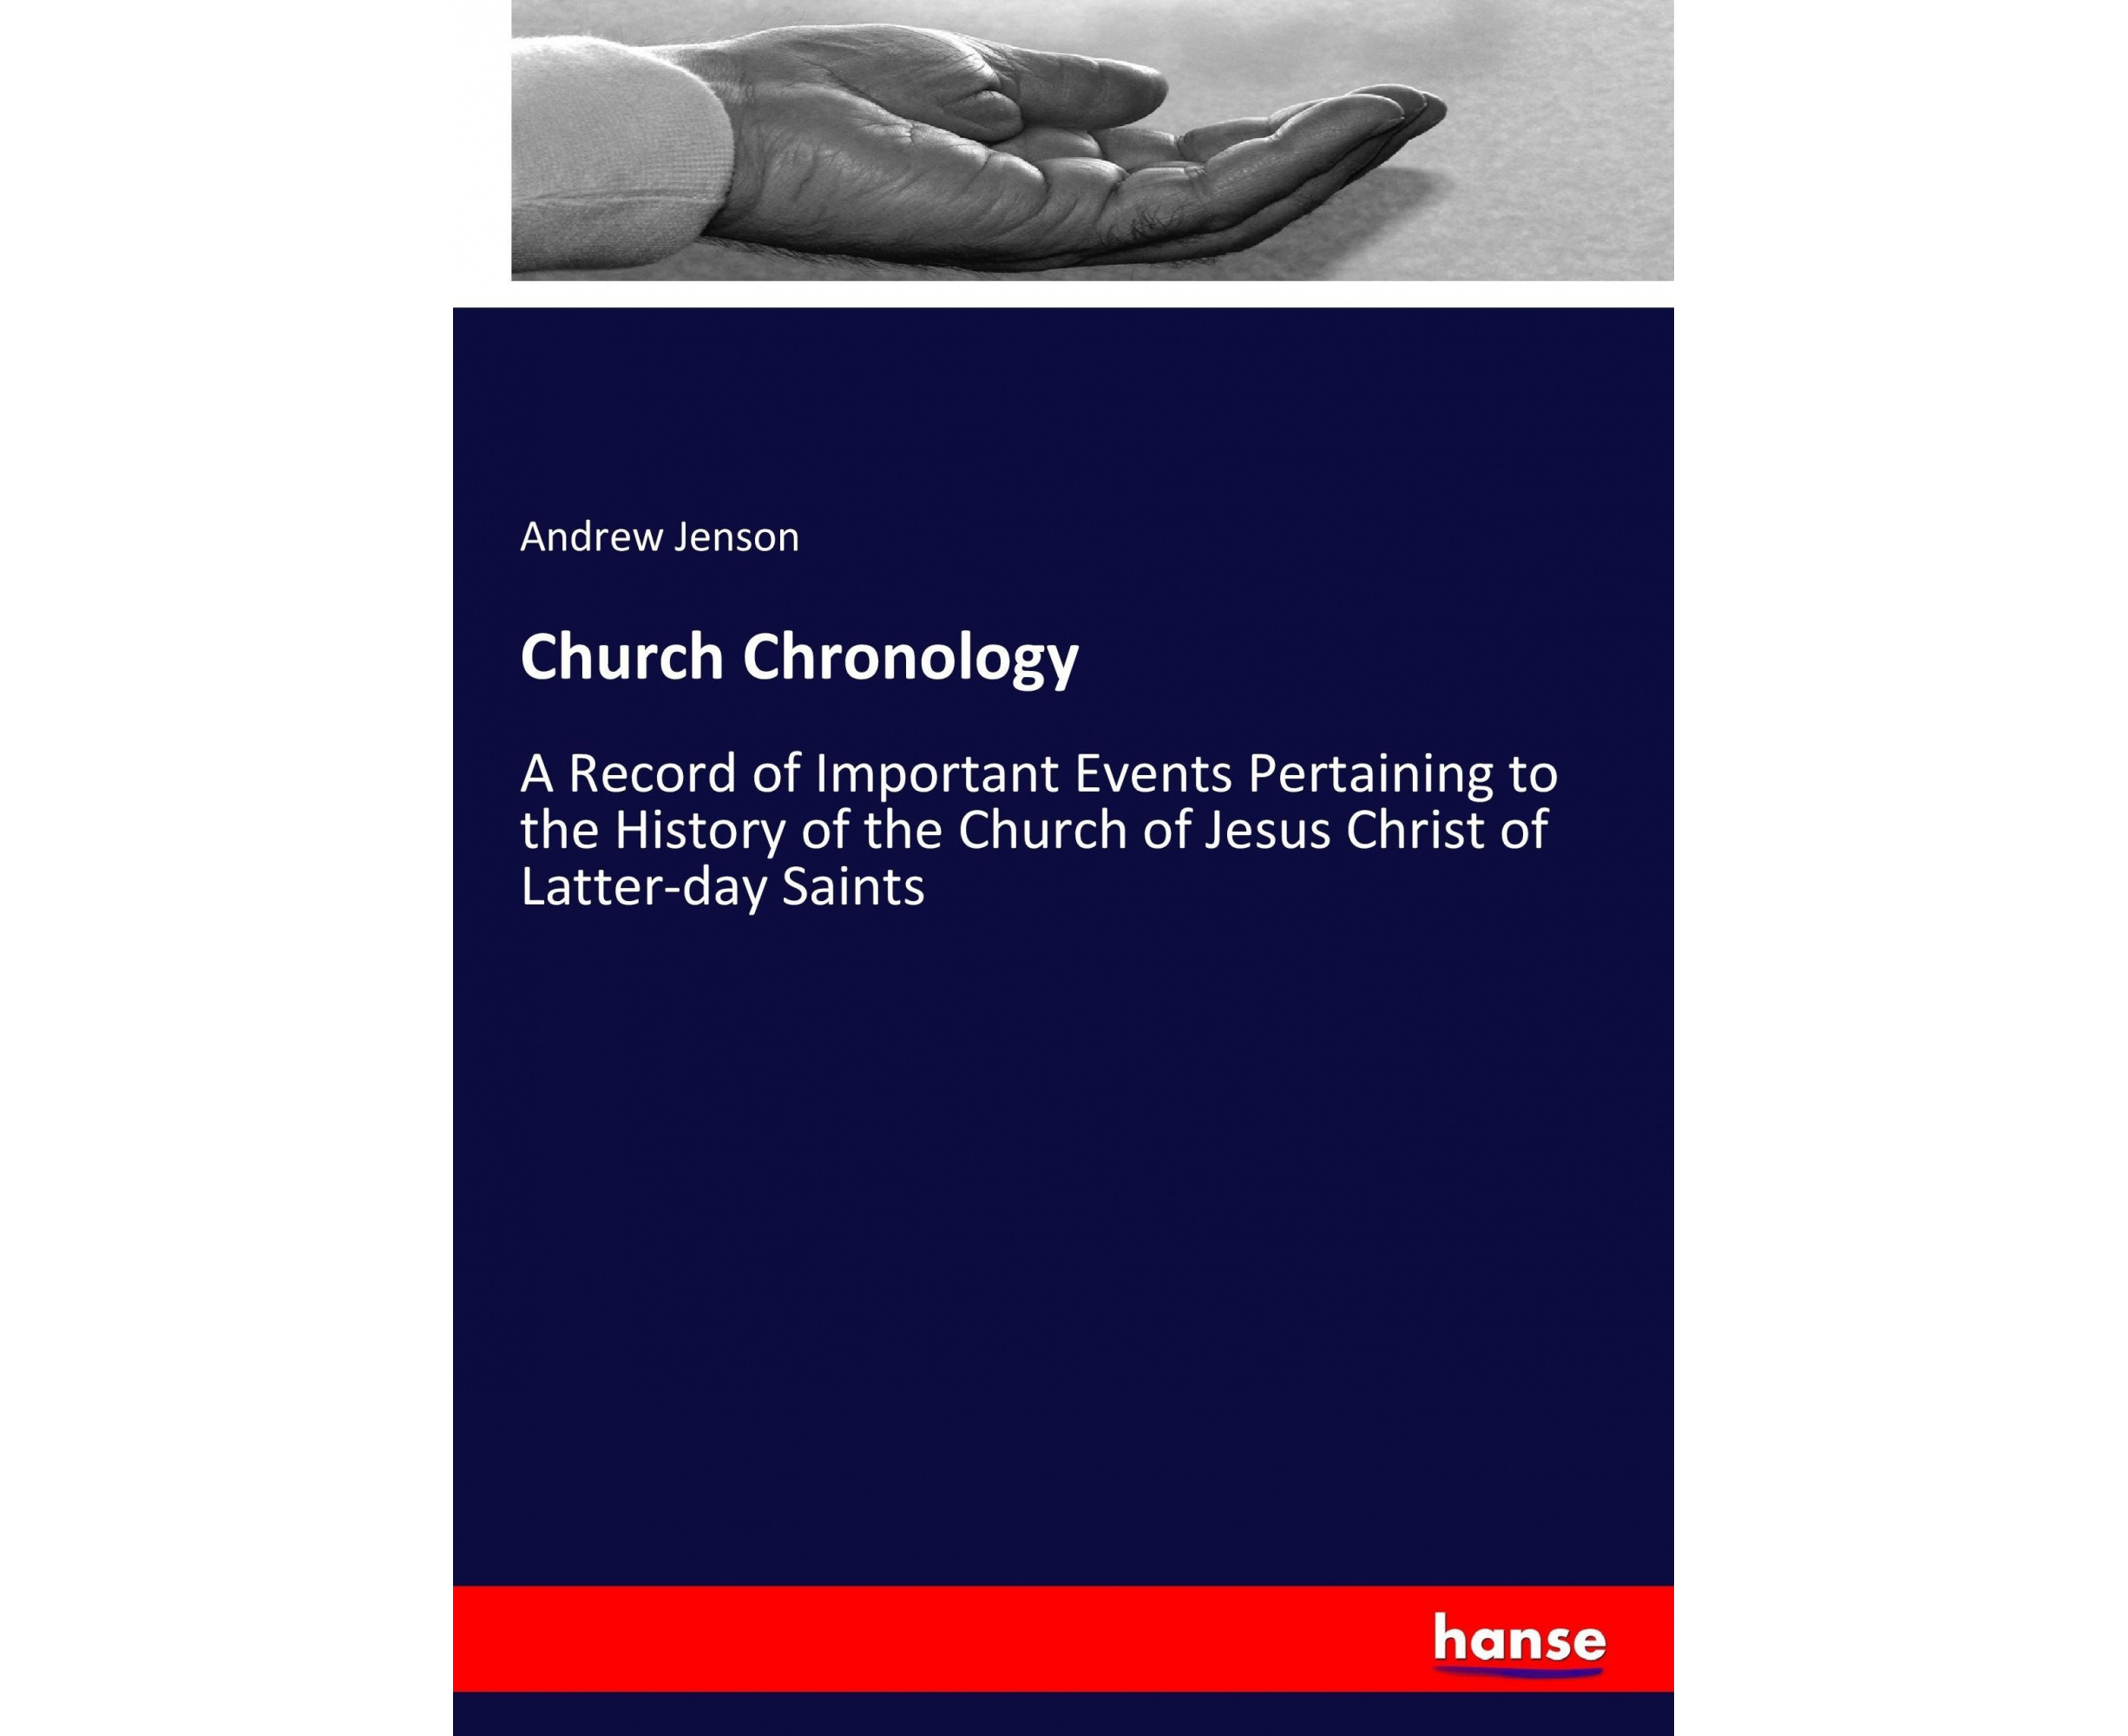 Church Chronology A Record of Important Events Pertaining to the